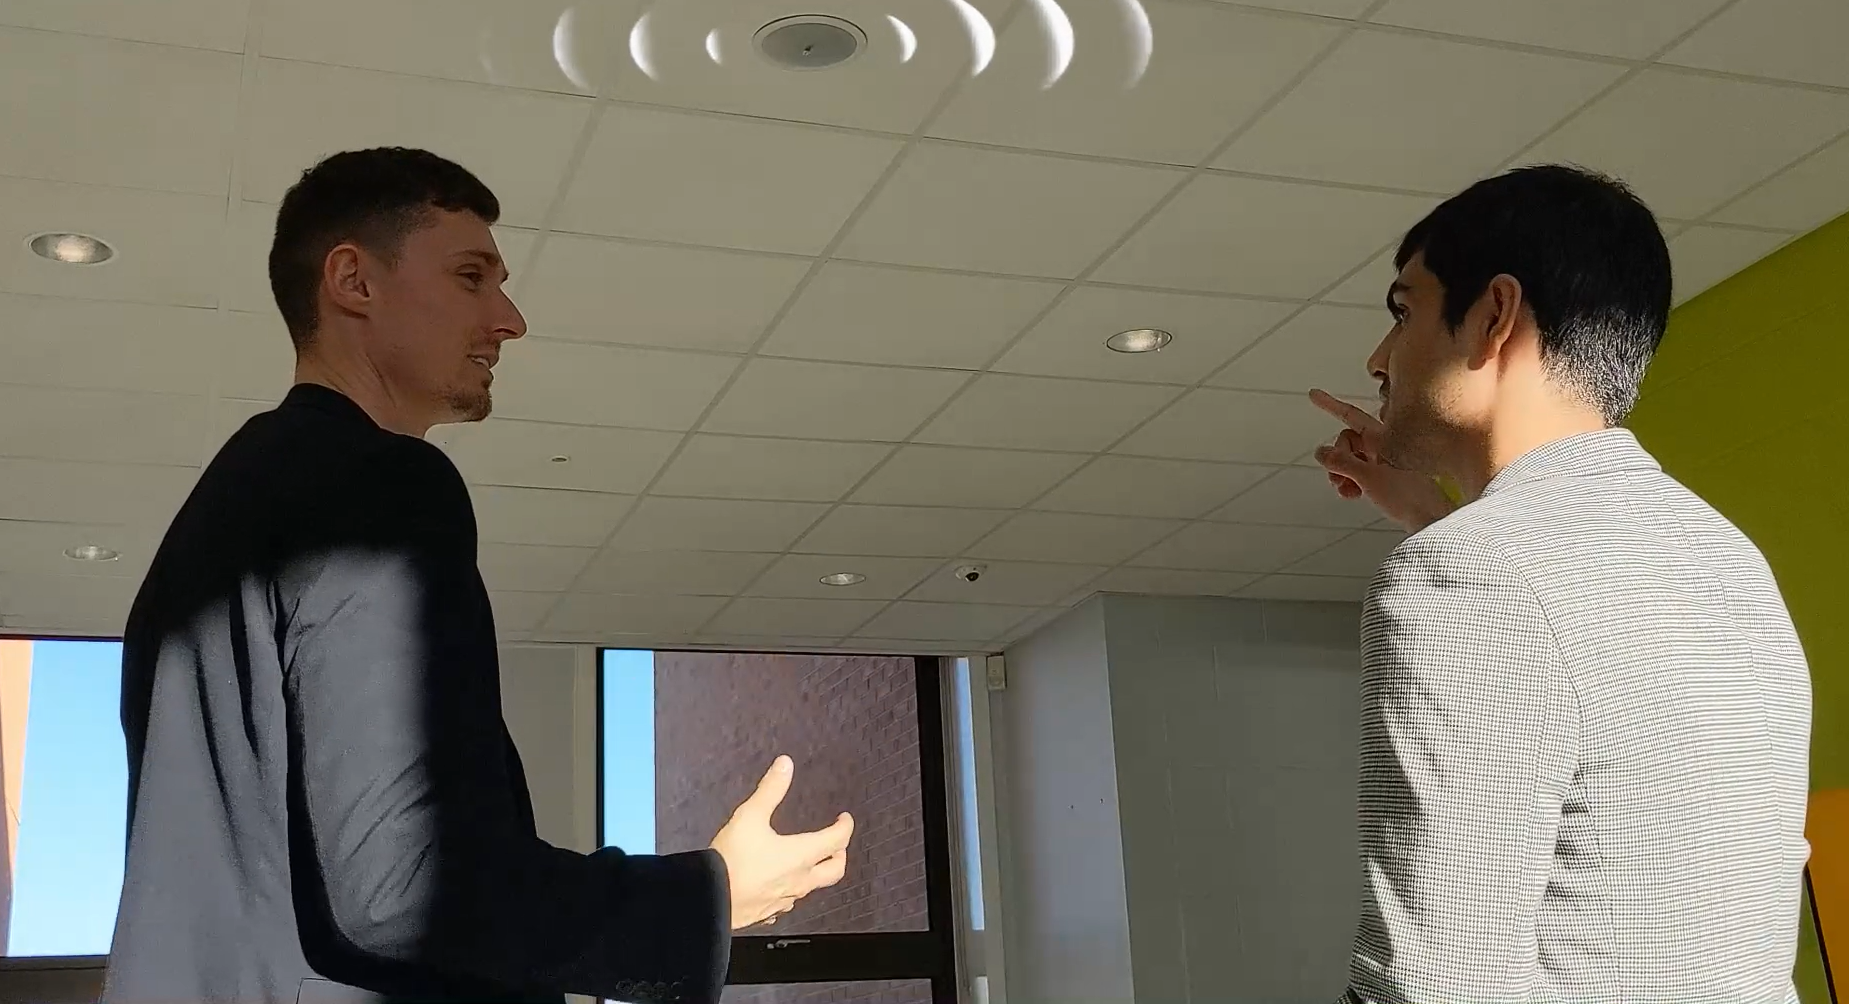 ICT Technician Maaz Melia and Oscar Rowley in conversation about the Audiebant lockdown system, illustrating its multi-zone broadcasting capabilities